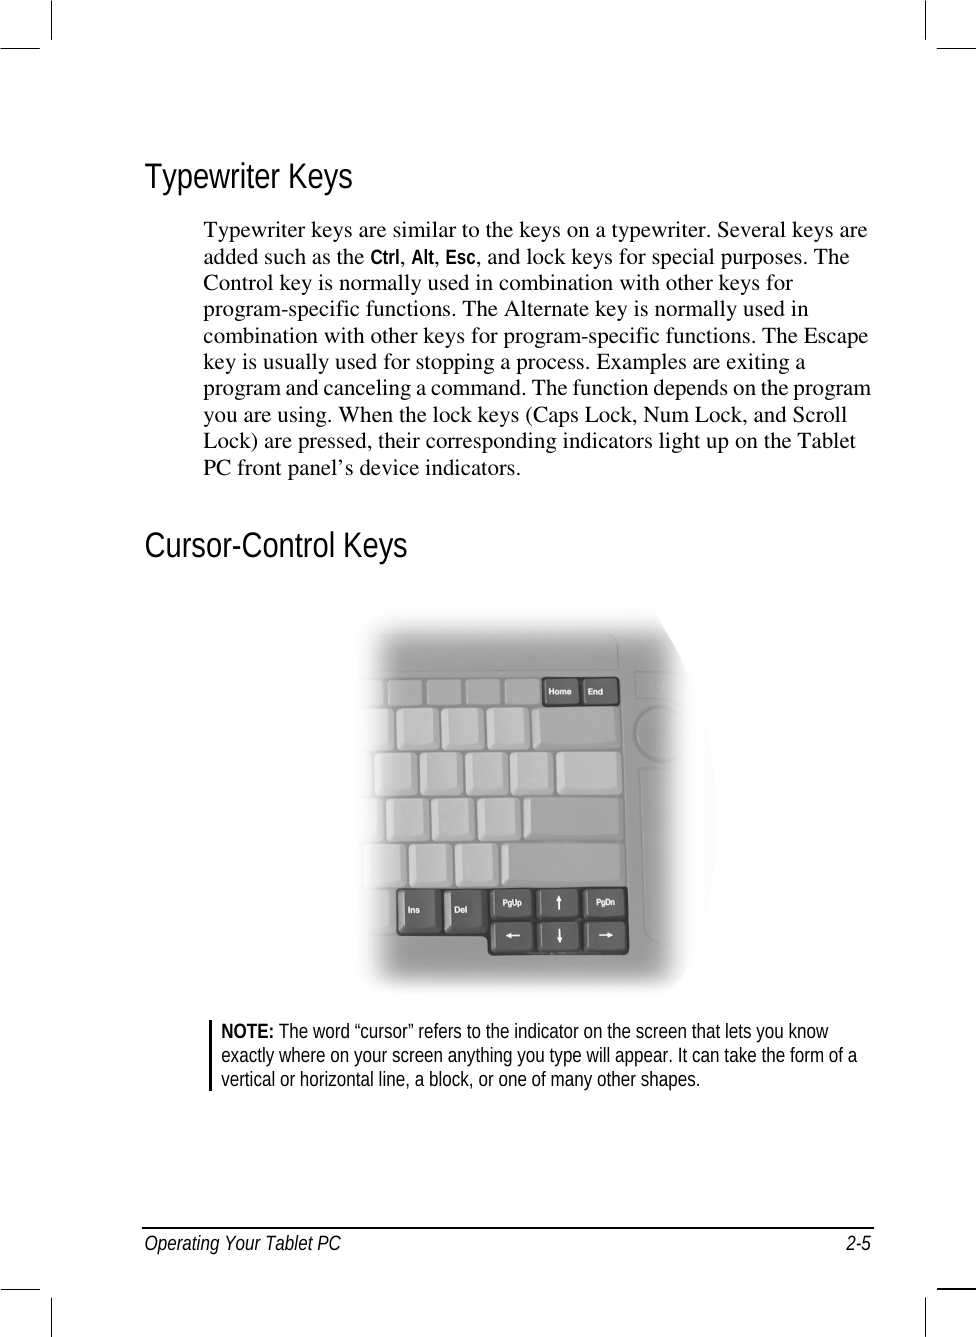  Operating Your Tablet PC  2-5 Typewriter Keys Typewriter keys are similar to the keys on a typewriter. Several keys are added such as the Ctrl, Alt, Esc, and lock keys for special purposes. The Control key is normally used in combination with other keys for program-specific functions. The Alternate key is normally used in combination with other keys for program-specific functions. The Escape key is usually used for stopping a process. Examples are exiting a program and canceling a command. The function depends on the program you are using. When the lock keys (Caps Lock, Num Lock, and Scroll Lock) are pressed, their corresponding indicators light up on the Tablet PC front panel’s device indicators. Cursor-Control Keys   NOTE: The word “cursor” refers to the indicator on the screen that lets you know exactly where on your screen anything you type will appear. It can take the form of a vertical or horizontal line, a block, or one of many other shapes.    